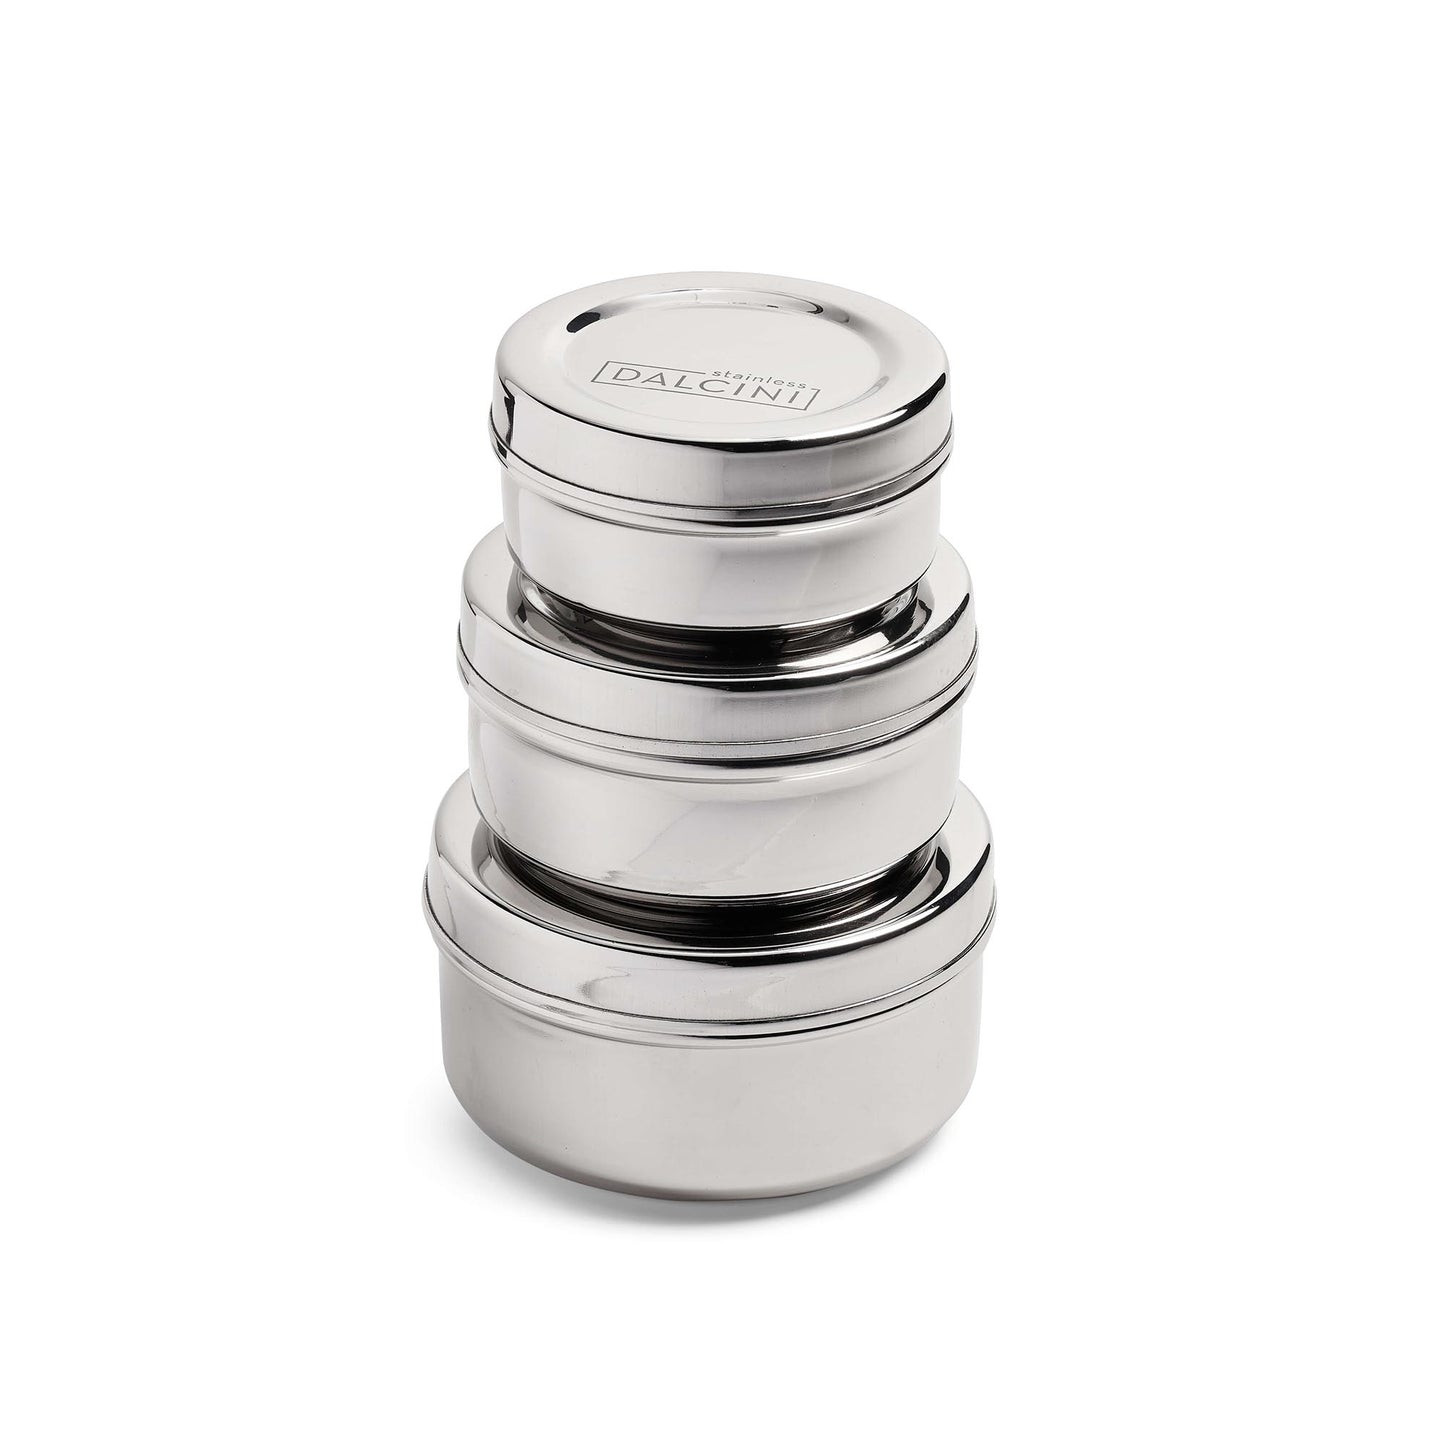 3 round stainless steel snack boxes stacked on top of the other